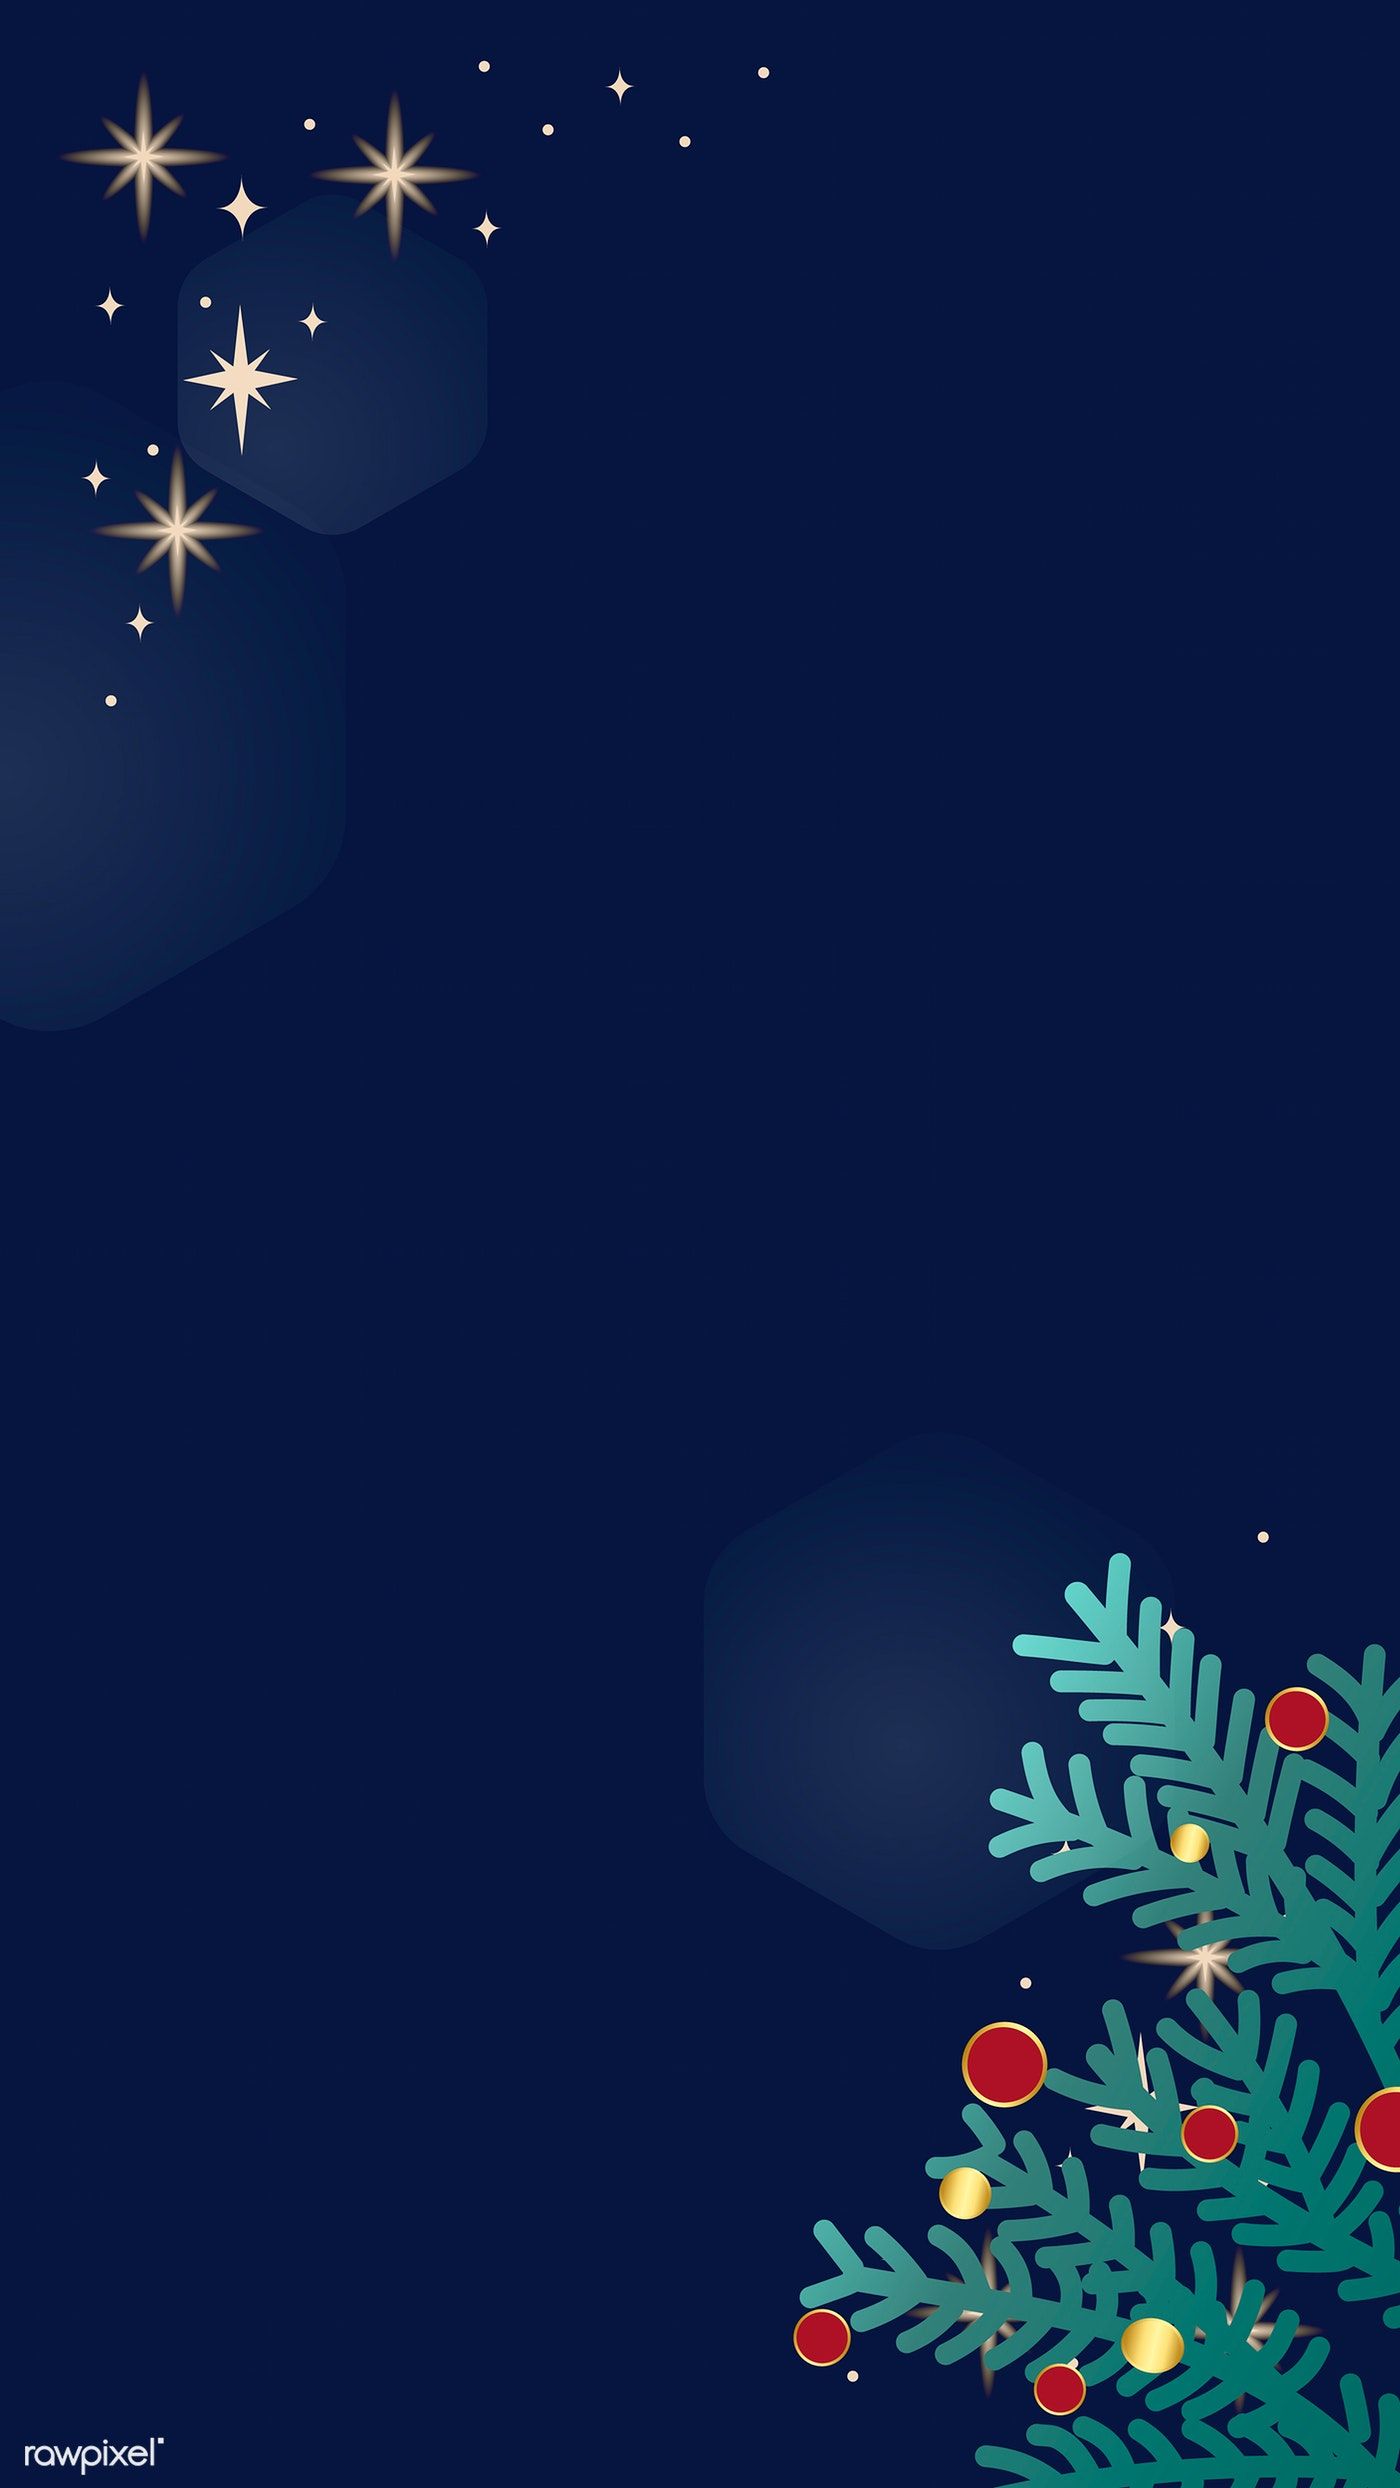 Premium Vector Of Christmas Doodle On Blue Background